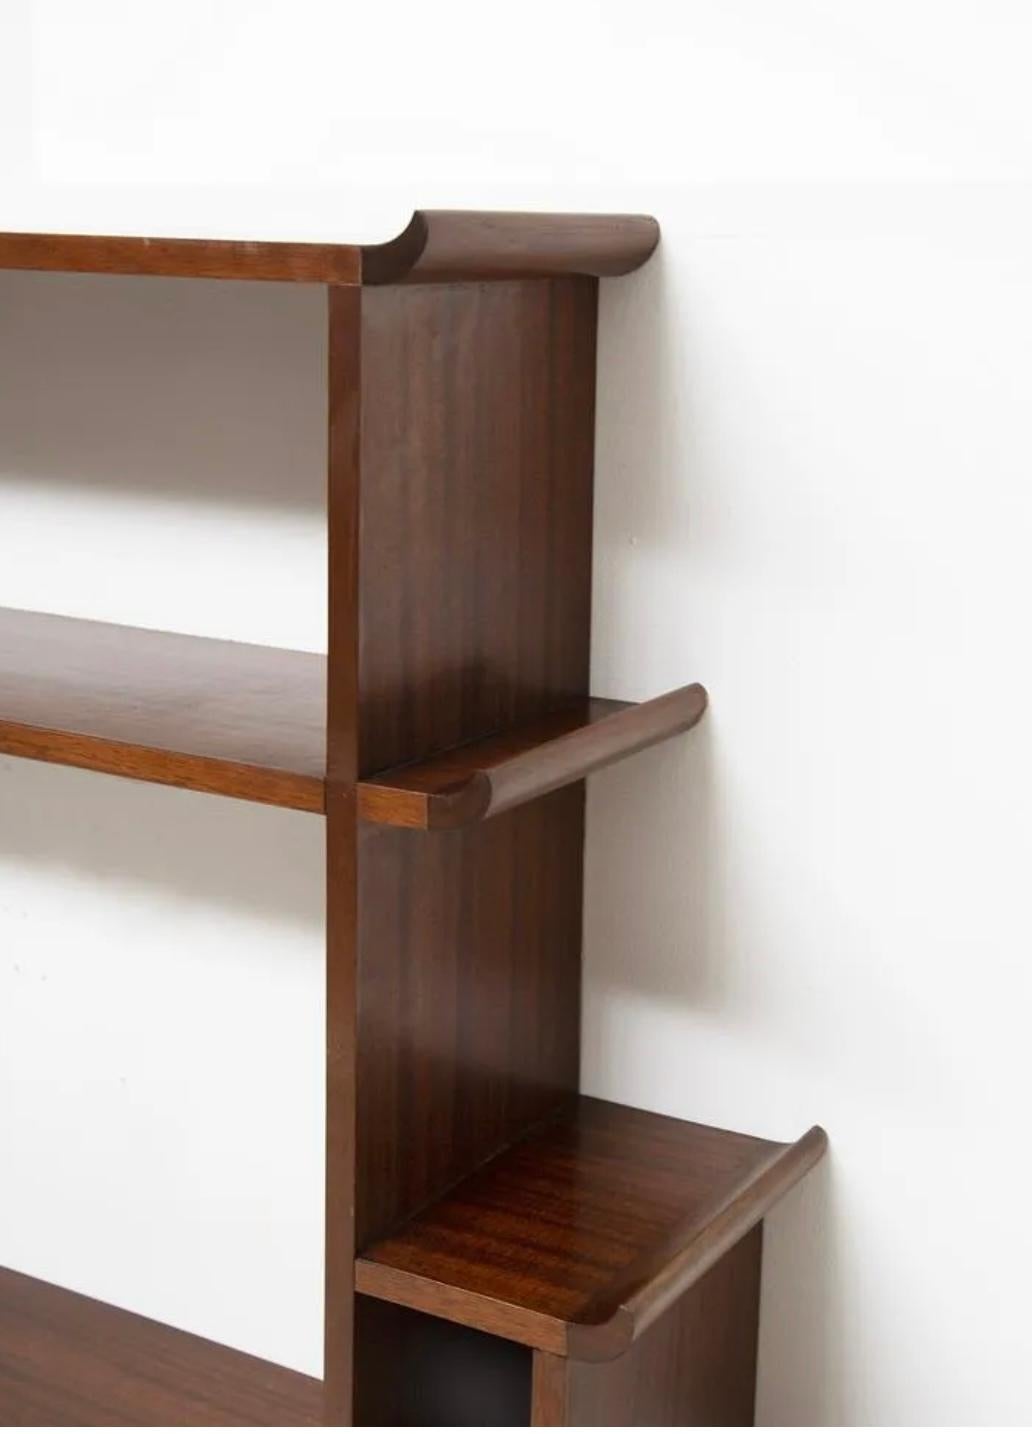 20th Century Large Wall Consolle/Shelf in Walnnut by Gio Ponti & E. Lancia, 1940, Italy